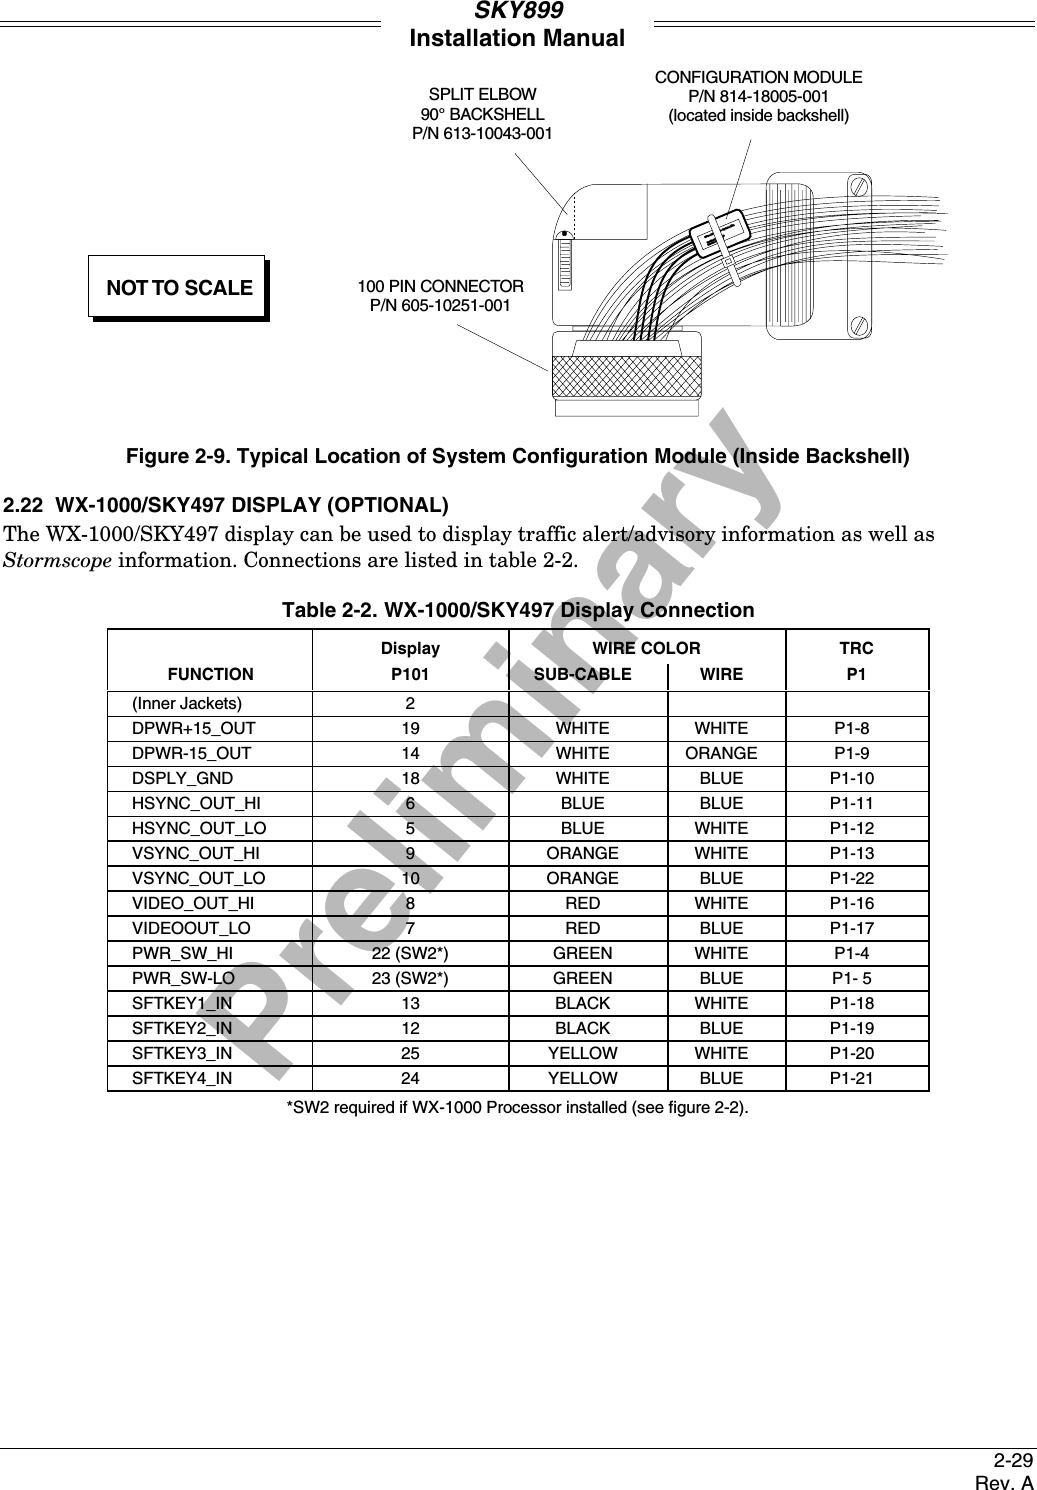 PreliminarySKY899Installation Manual2-29Rev. ASPLIT ELBOW90° BACKSHELLP/N 613-10043-001100 PIN CONNECTORP/N 605-10251-001CONFIGURATION MODULEP/N 814-18005-001(located inside backshell)BFGoodrich Avionics Systems, INC.BFGoodrich Avionics Systems, INC.Configuration ModuleP/N 814-18005-001Configuration ModuleP/N 814-18005-001NOT TO SCALEFigure 2-9. Typical Location of System Configuration Module (Inside Backshell)2.22  WX-1000/SKY497 DISPLAY (OPTIONAL)The WX-1000/SKY497 display can be used to display traffic alert/advisory information as well asStormscope information. Connections are listed in table 2-2.Table 2-2. WX-1000/SKY497 Display ConnectionDisplay WIRE COLOR TRCFUNCTION P101 SUB-CABLE WIRE P1(Inner Jackets) 2DPWR+15_OUT 19 WHITE WHITE P1-8DPWR-15_OUT 14 WHITE ORANGE P1-9DSPLY_GND 18 WHITE BLUE P1-10HSYNC_OUT_HI 6 BLUE BLUE P1-11HSYNC_OUT_LO 5 BLUE WHITE P1-12VSYNC_OUT_HI 9 ORANGE WHITE P1-13VSYNC_OUT_LO 10 ORANGE BLUE P1-22VIDEO_OUT_HI 8 RED WHITE P1-16VIDEOOUT_LO 7 RED BLUE P1-17PWR_SW_HI 22 (SW2*) GREEN WHITE P1-4PWR_SW-LO 23 (SW2*) GREEN BLUE P1- 5SFTKEY1_IN 13 BLACK WHITE P1-18SFTKEY2_IN 12 BLACK BLUE P1-19SFTKEY3_IN 25 YELLOW WHITE P1-20SFTKEY4_IN 24 YELLOW BLUE P1-21*SW2 required if WX-1000 Processor installed (see figure 2-2).